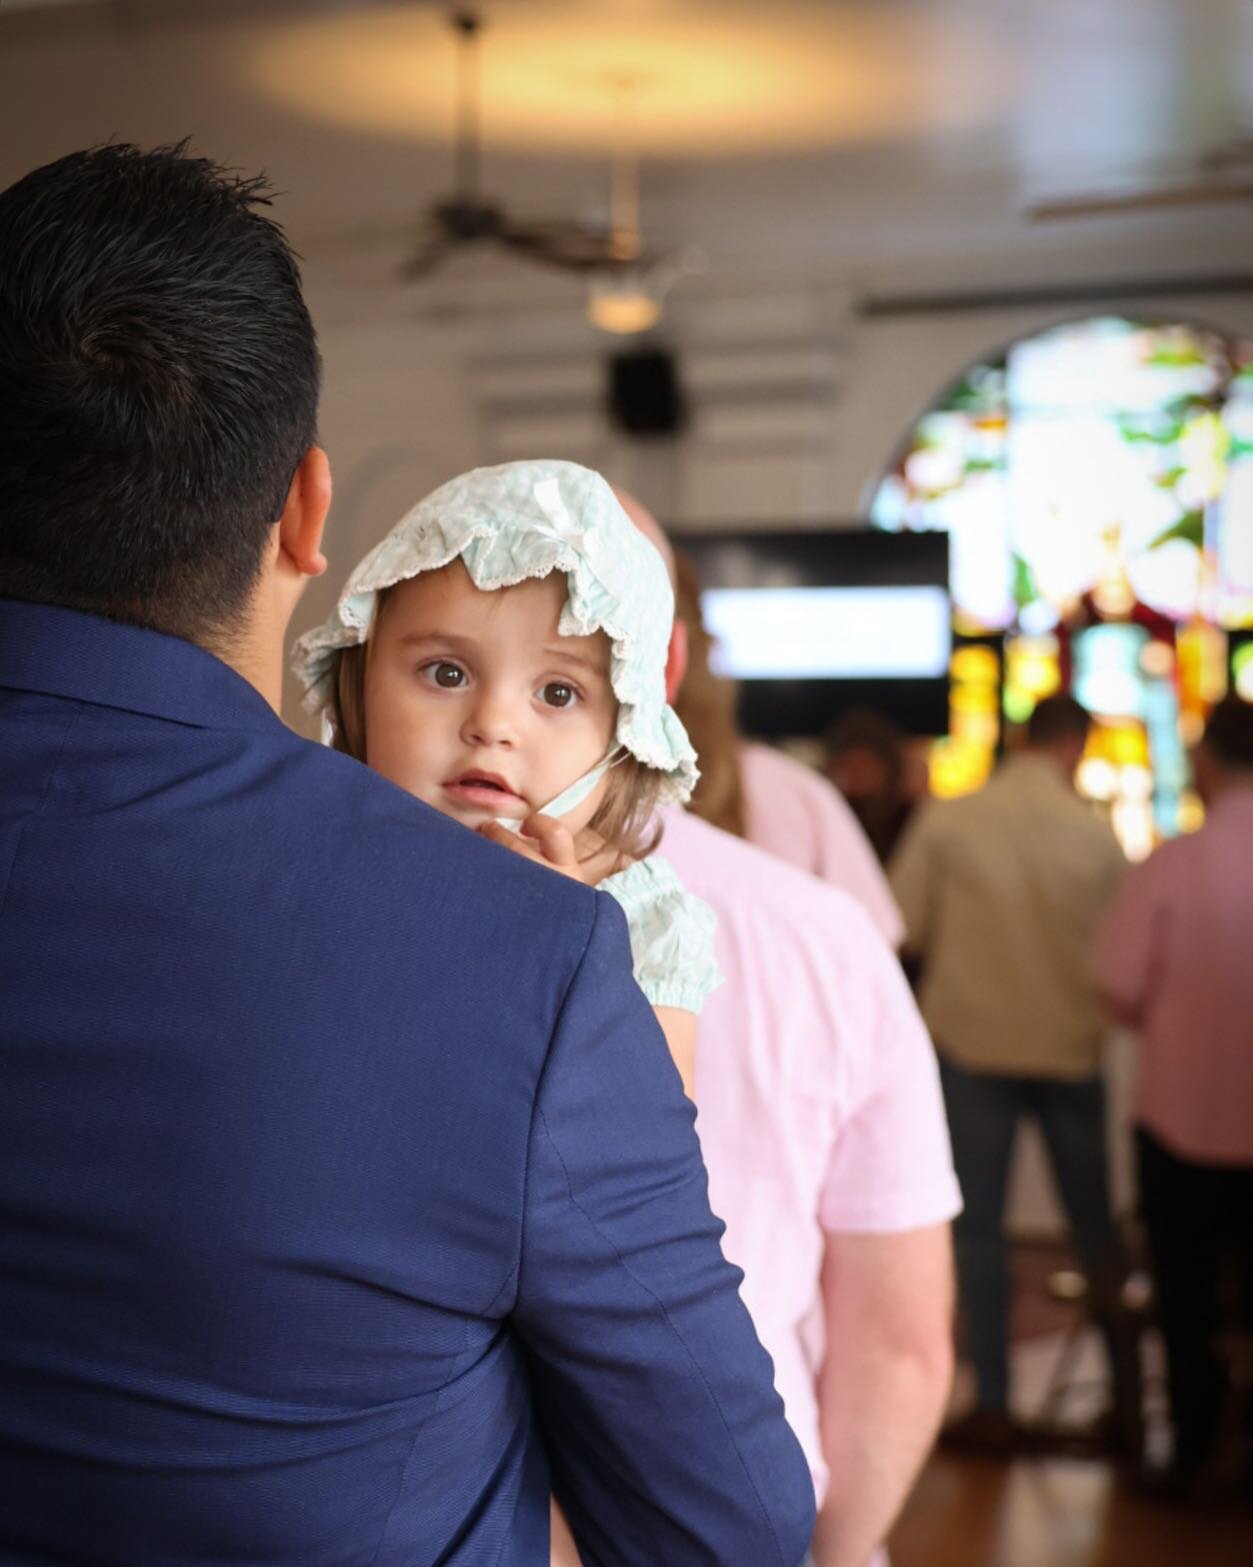 We&rsquo;re so excited for our child dedication tomorrow! This will be a sweet time when we get to pray over families, and as a church, commit to walking alongside both parents and kiddos in discipleship to Jesus.

10:00am
Hermann Sons
525 S St. Mary